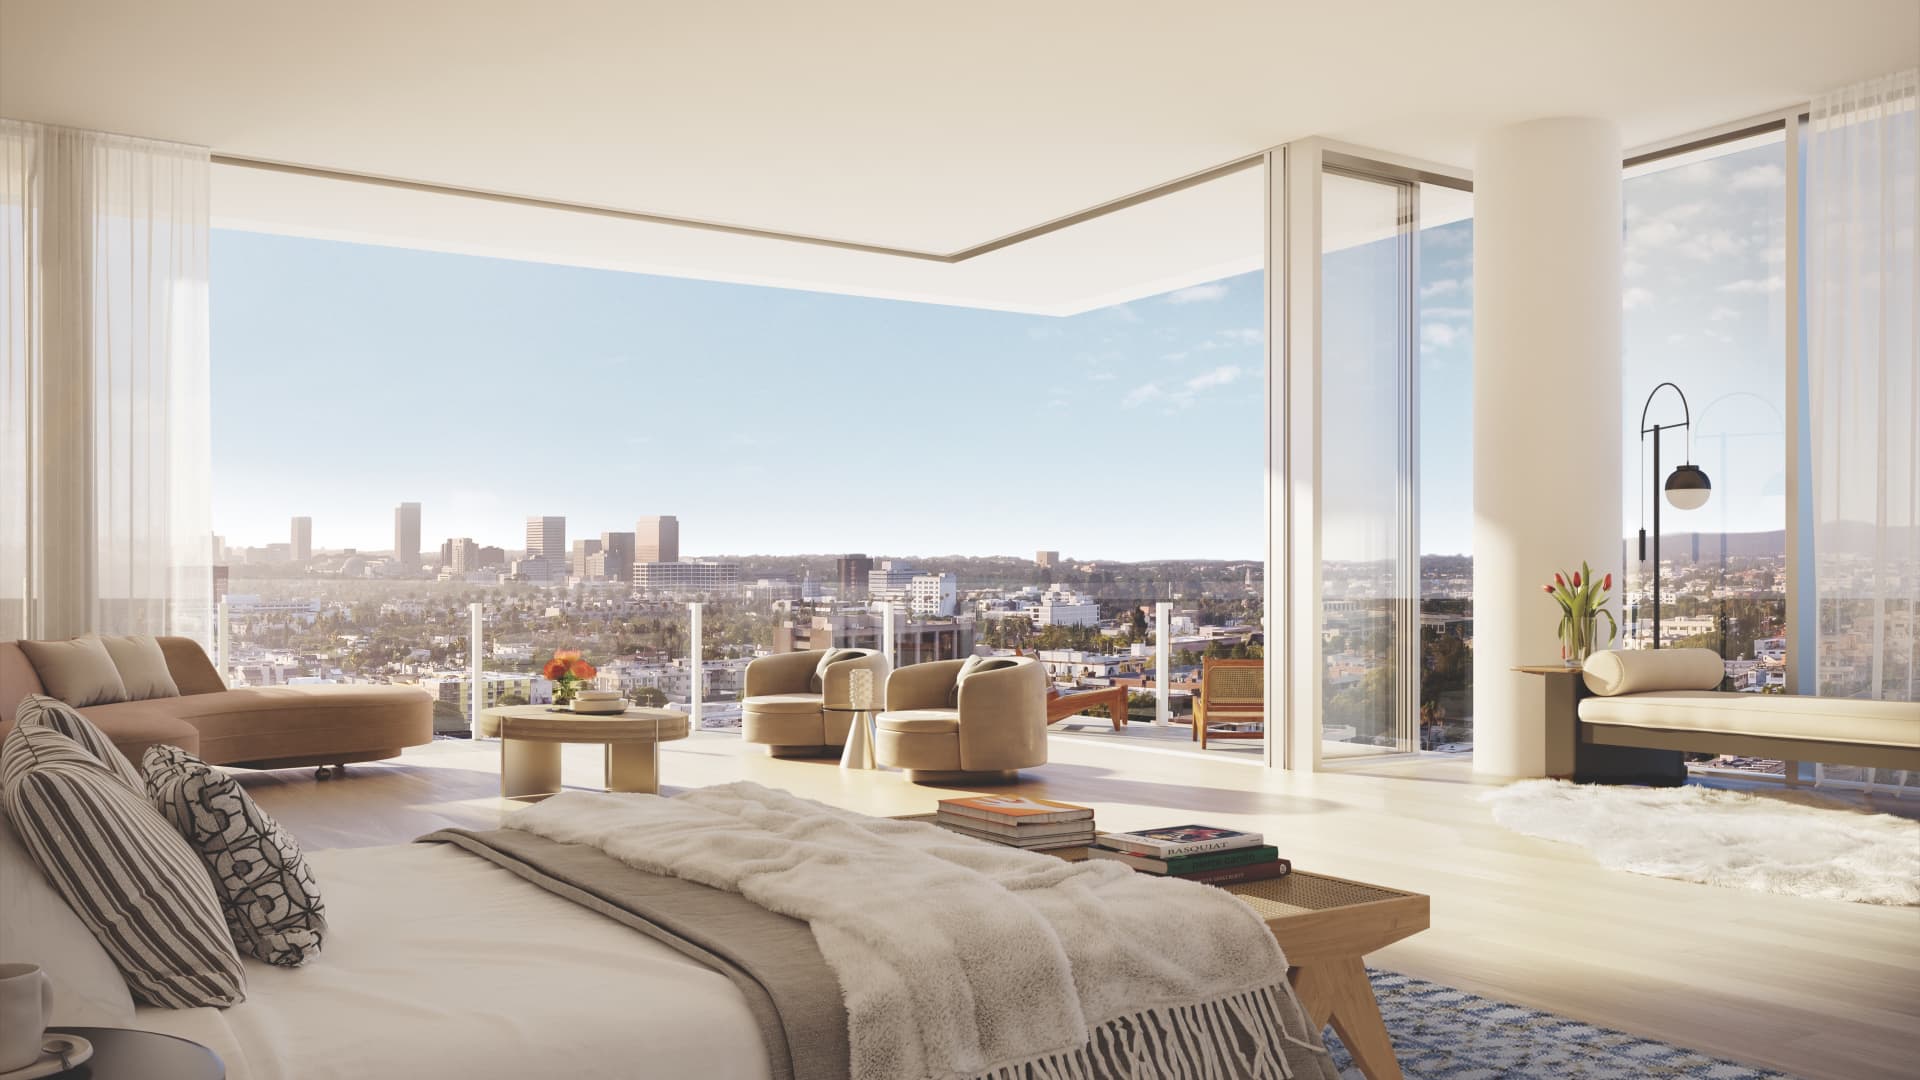 Watch Inside A $50,000,000 West Hollywood Penthouse, On the Market